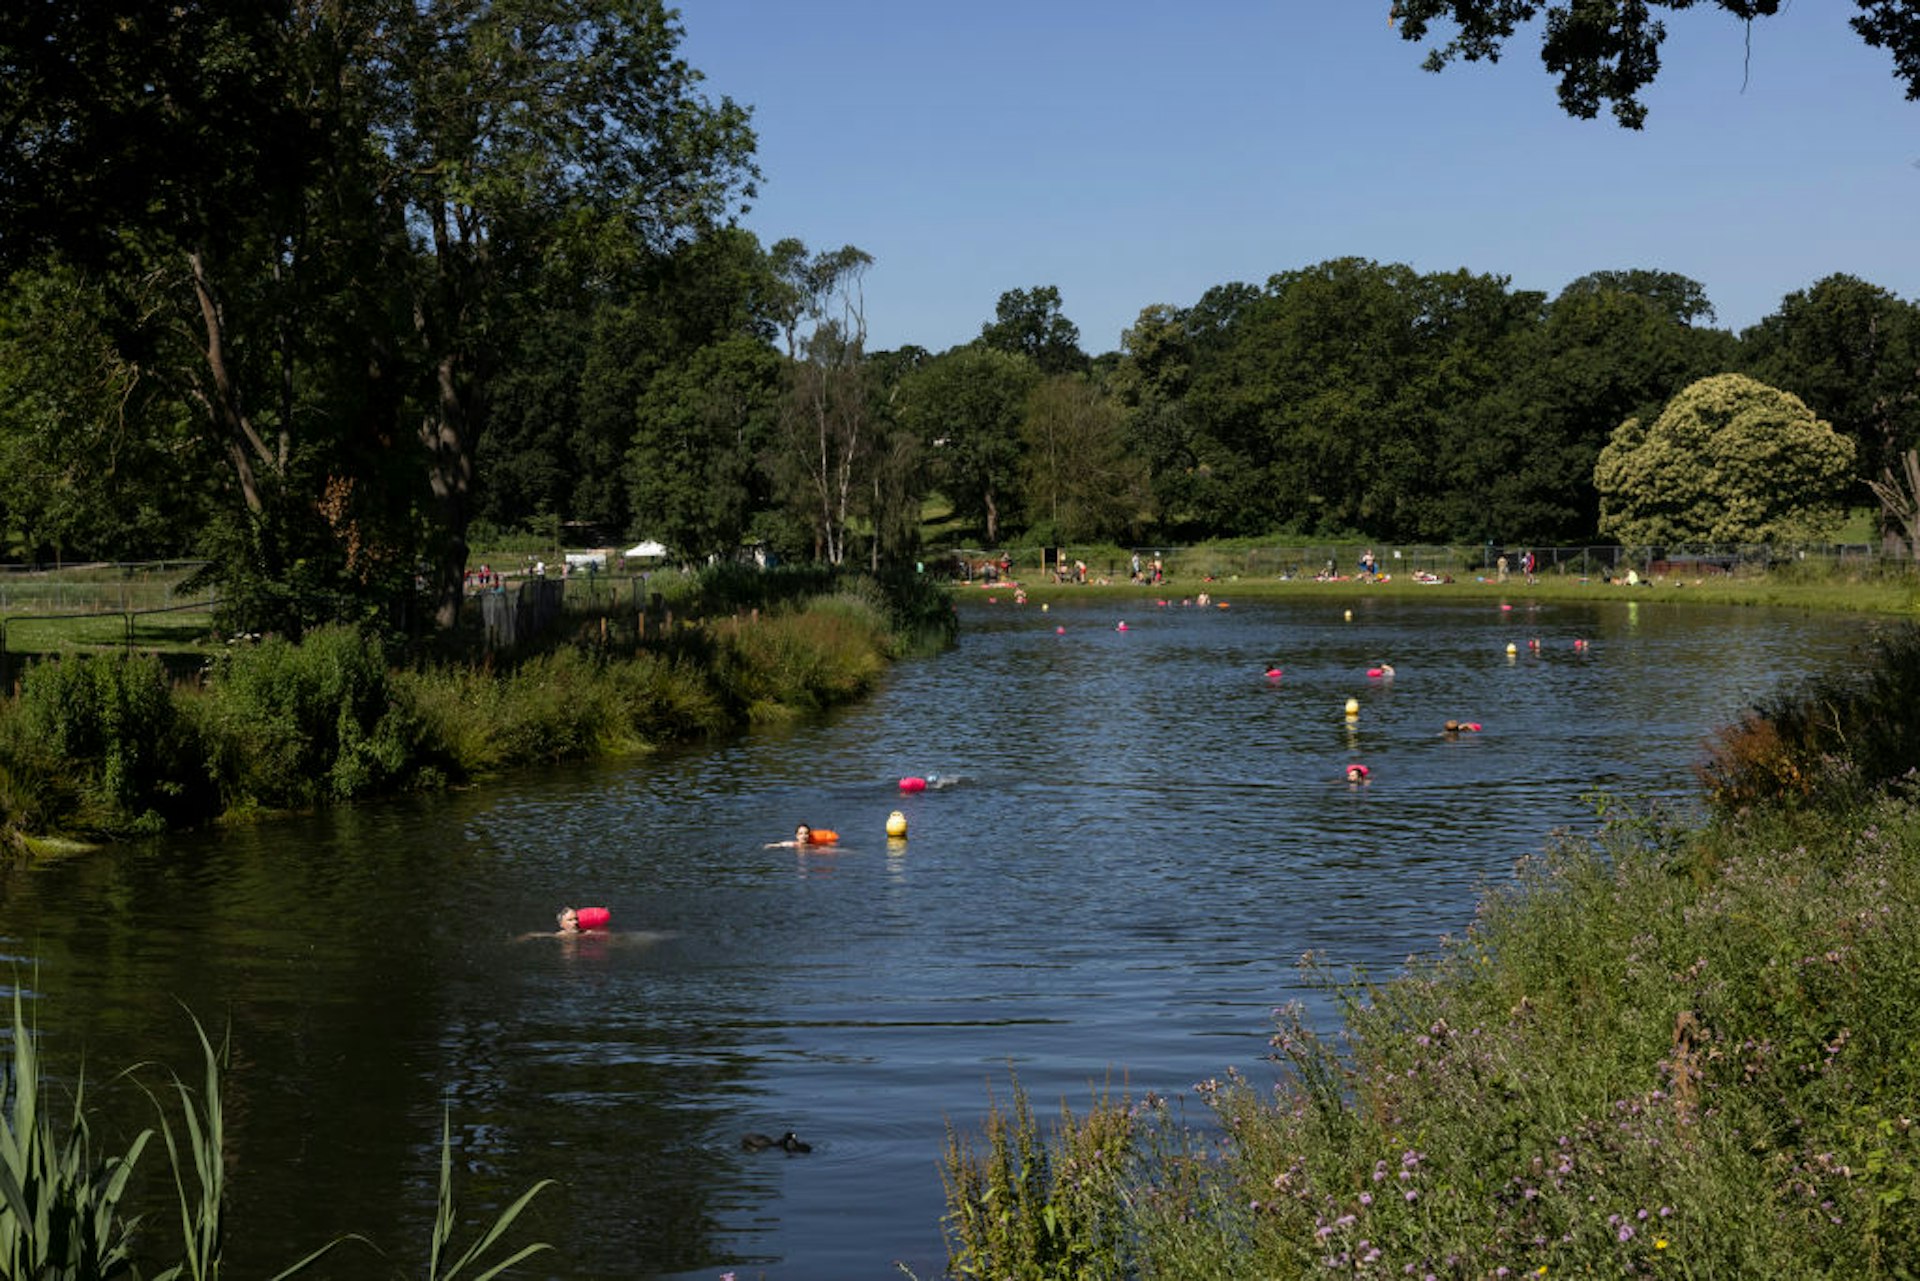 People swim in the lake at Beckenham Place Park